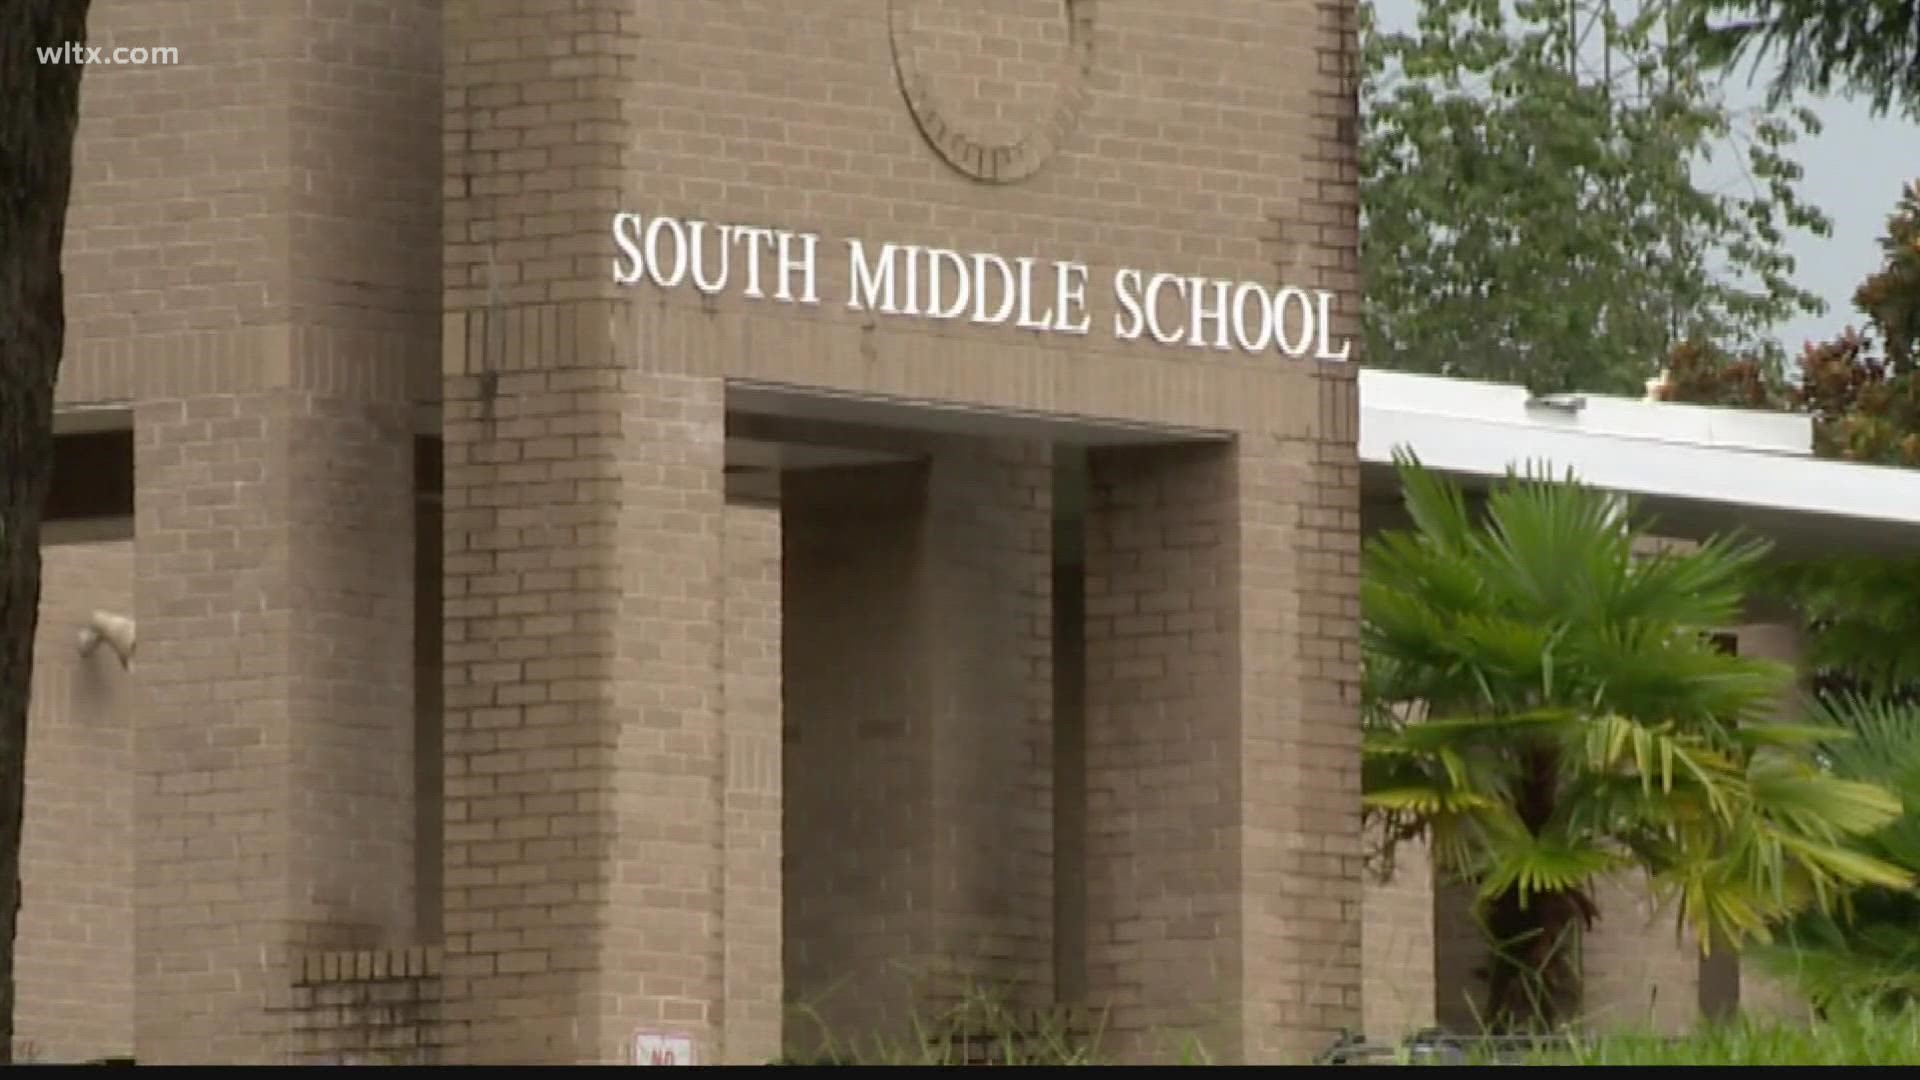 Two teachers from the same middle school passed away in one week from COVID-19 complications. A 16-year-old in the same school district recently passed away.